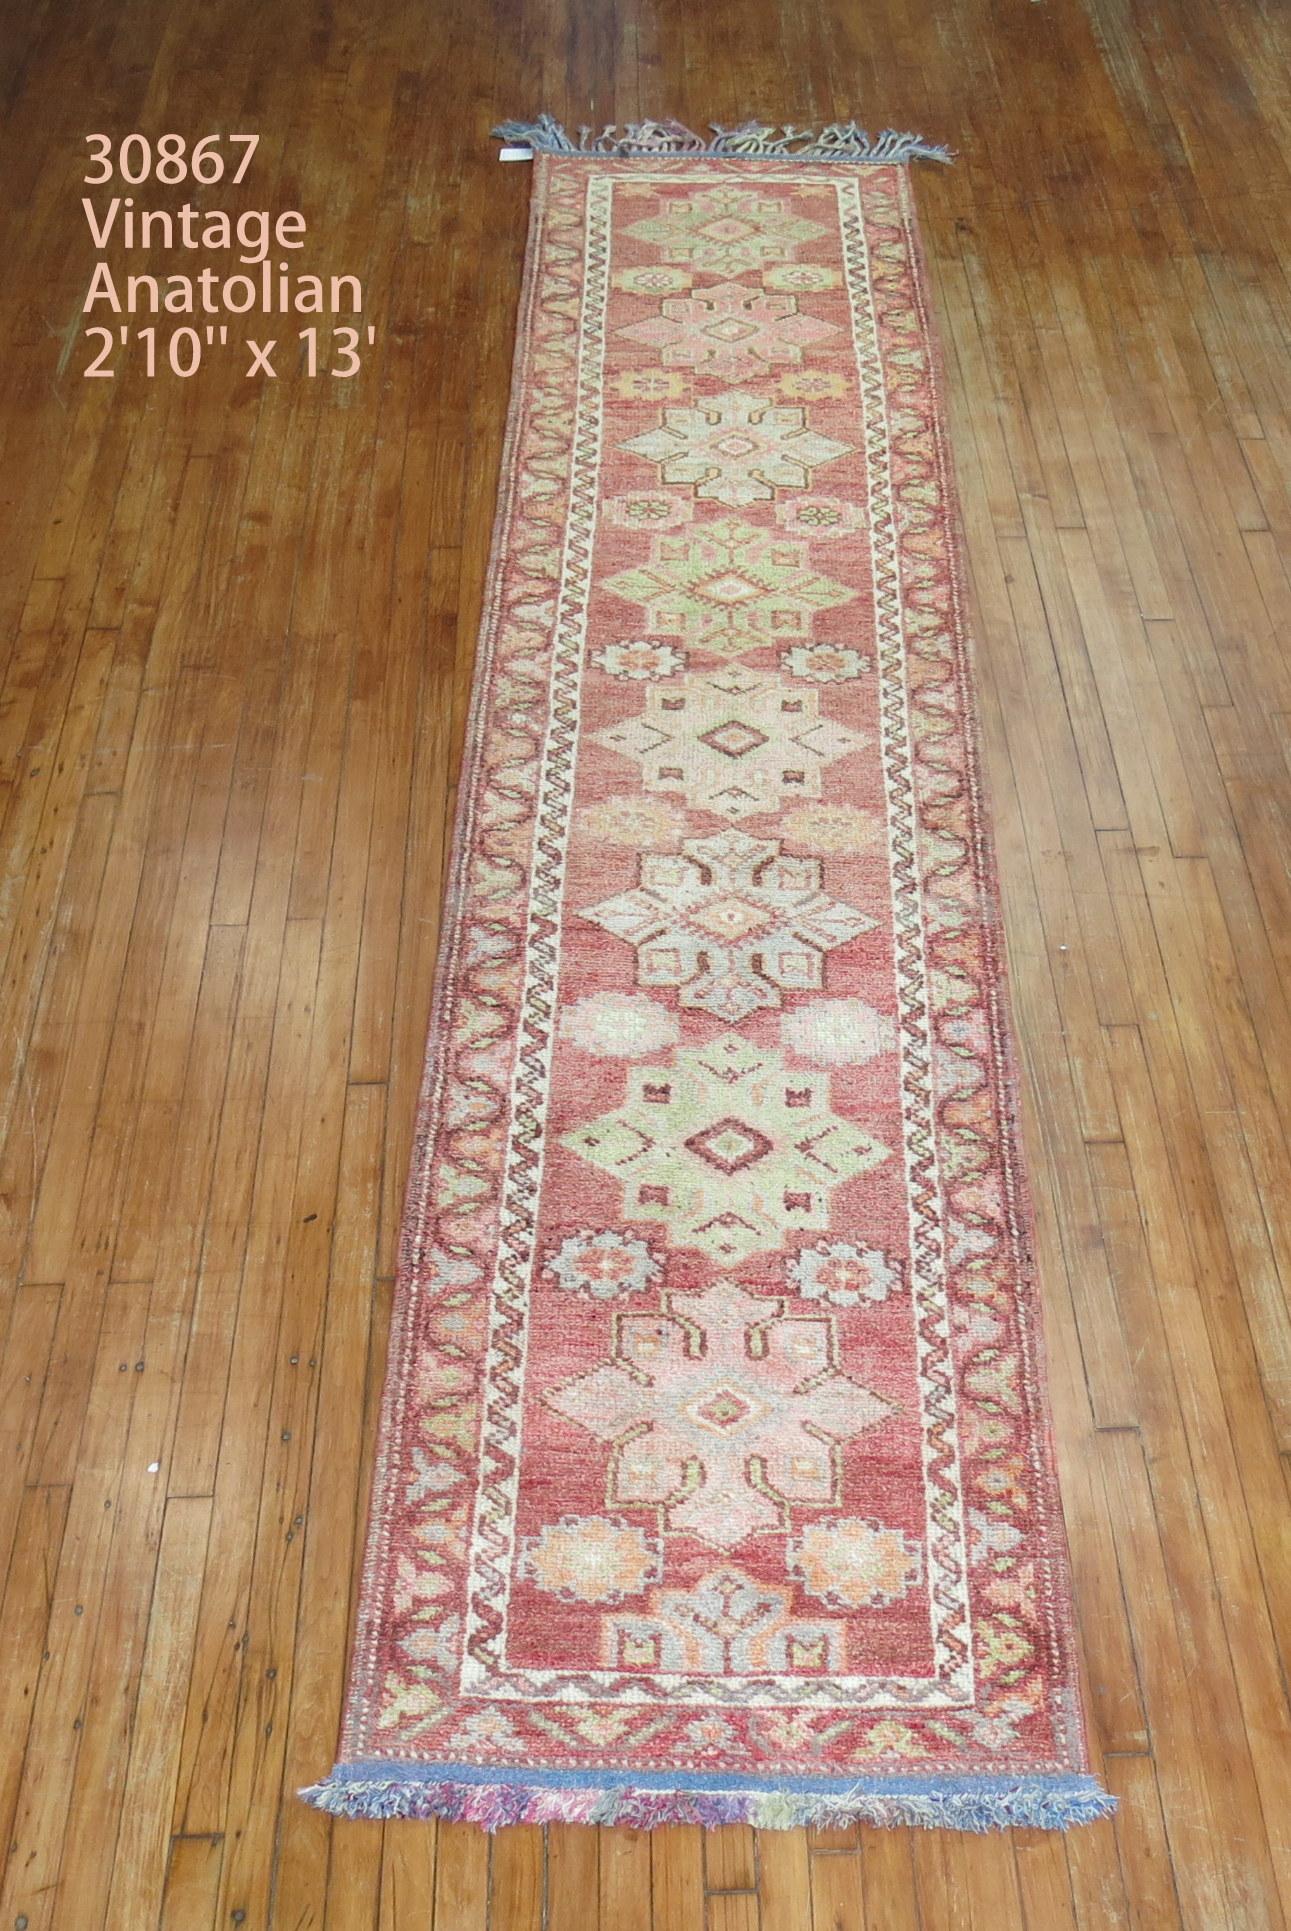 Turkish Anatolian runner from the middle of the 20th century highlighted by light green and pink accents on a red field

Measures: 2'10